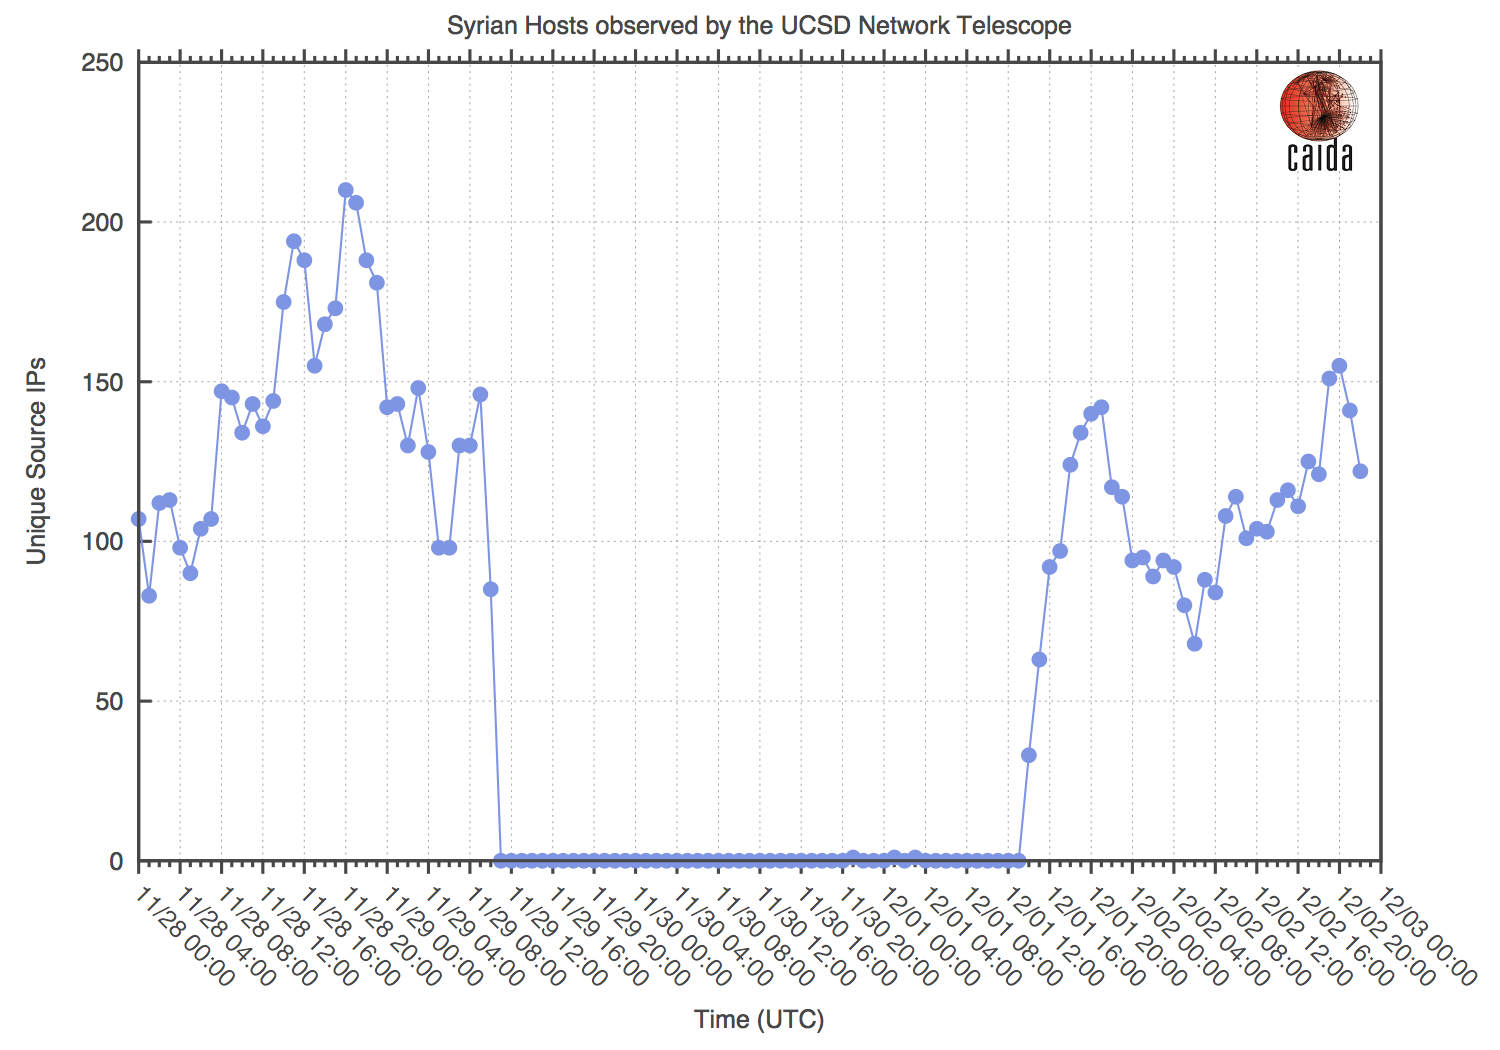 The Syrian Internet Blackout in Nov 2012 as seen at the UCSD Network Telescope